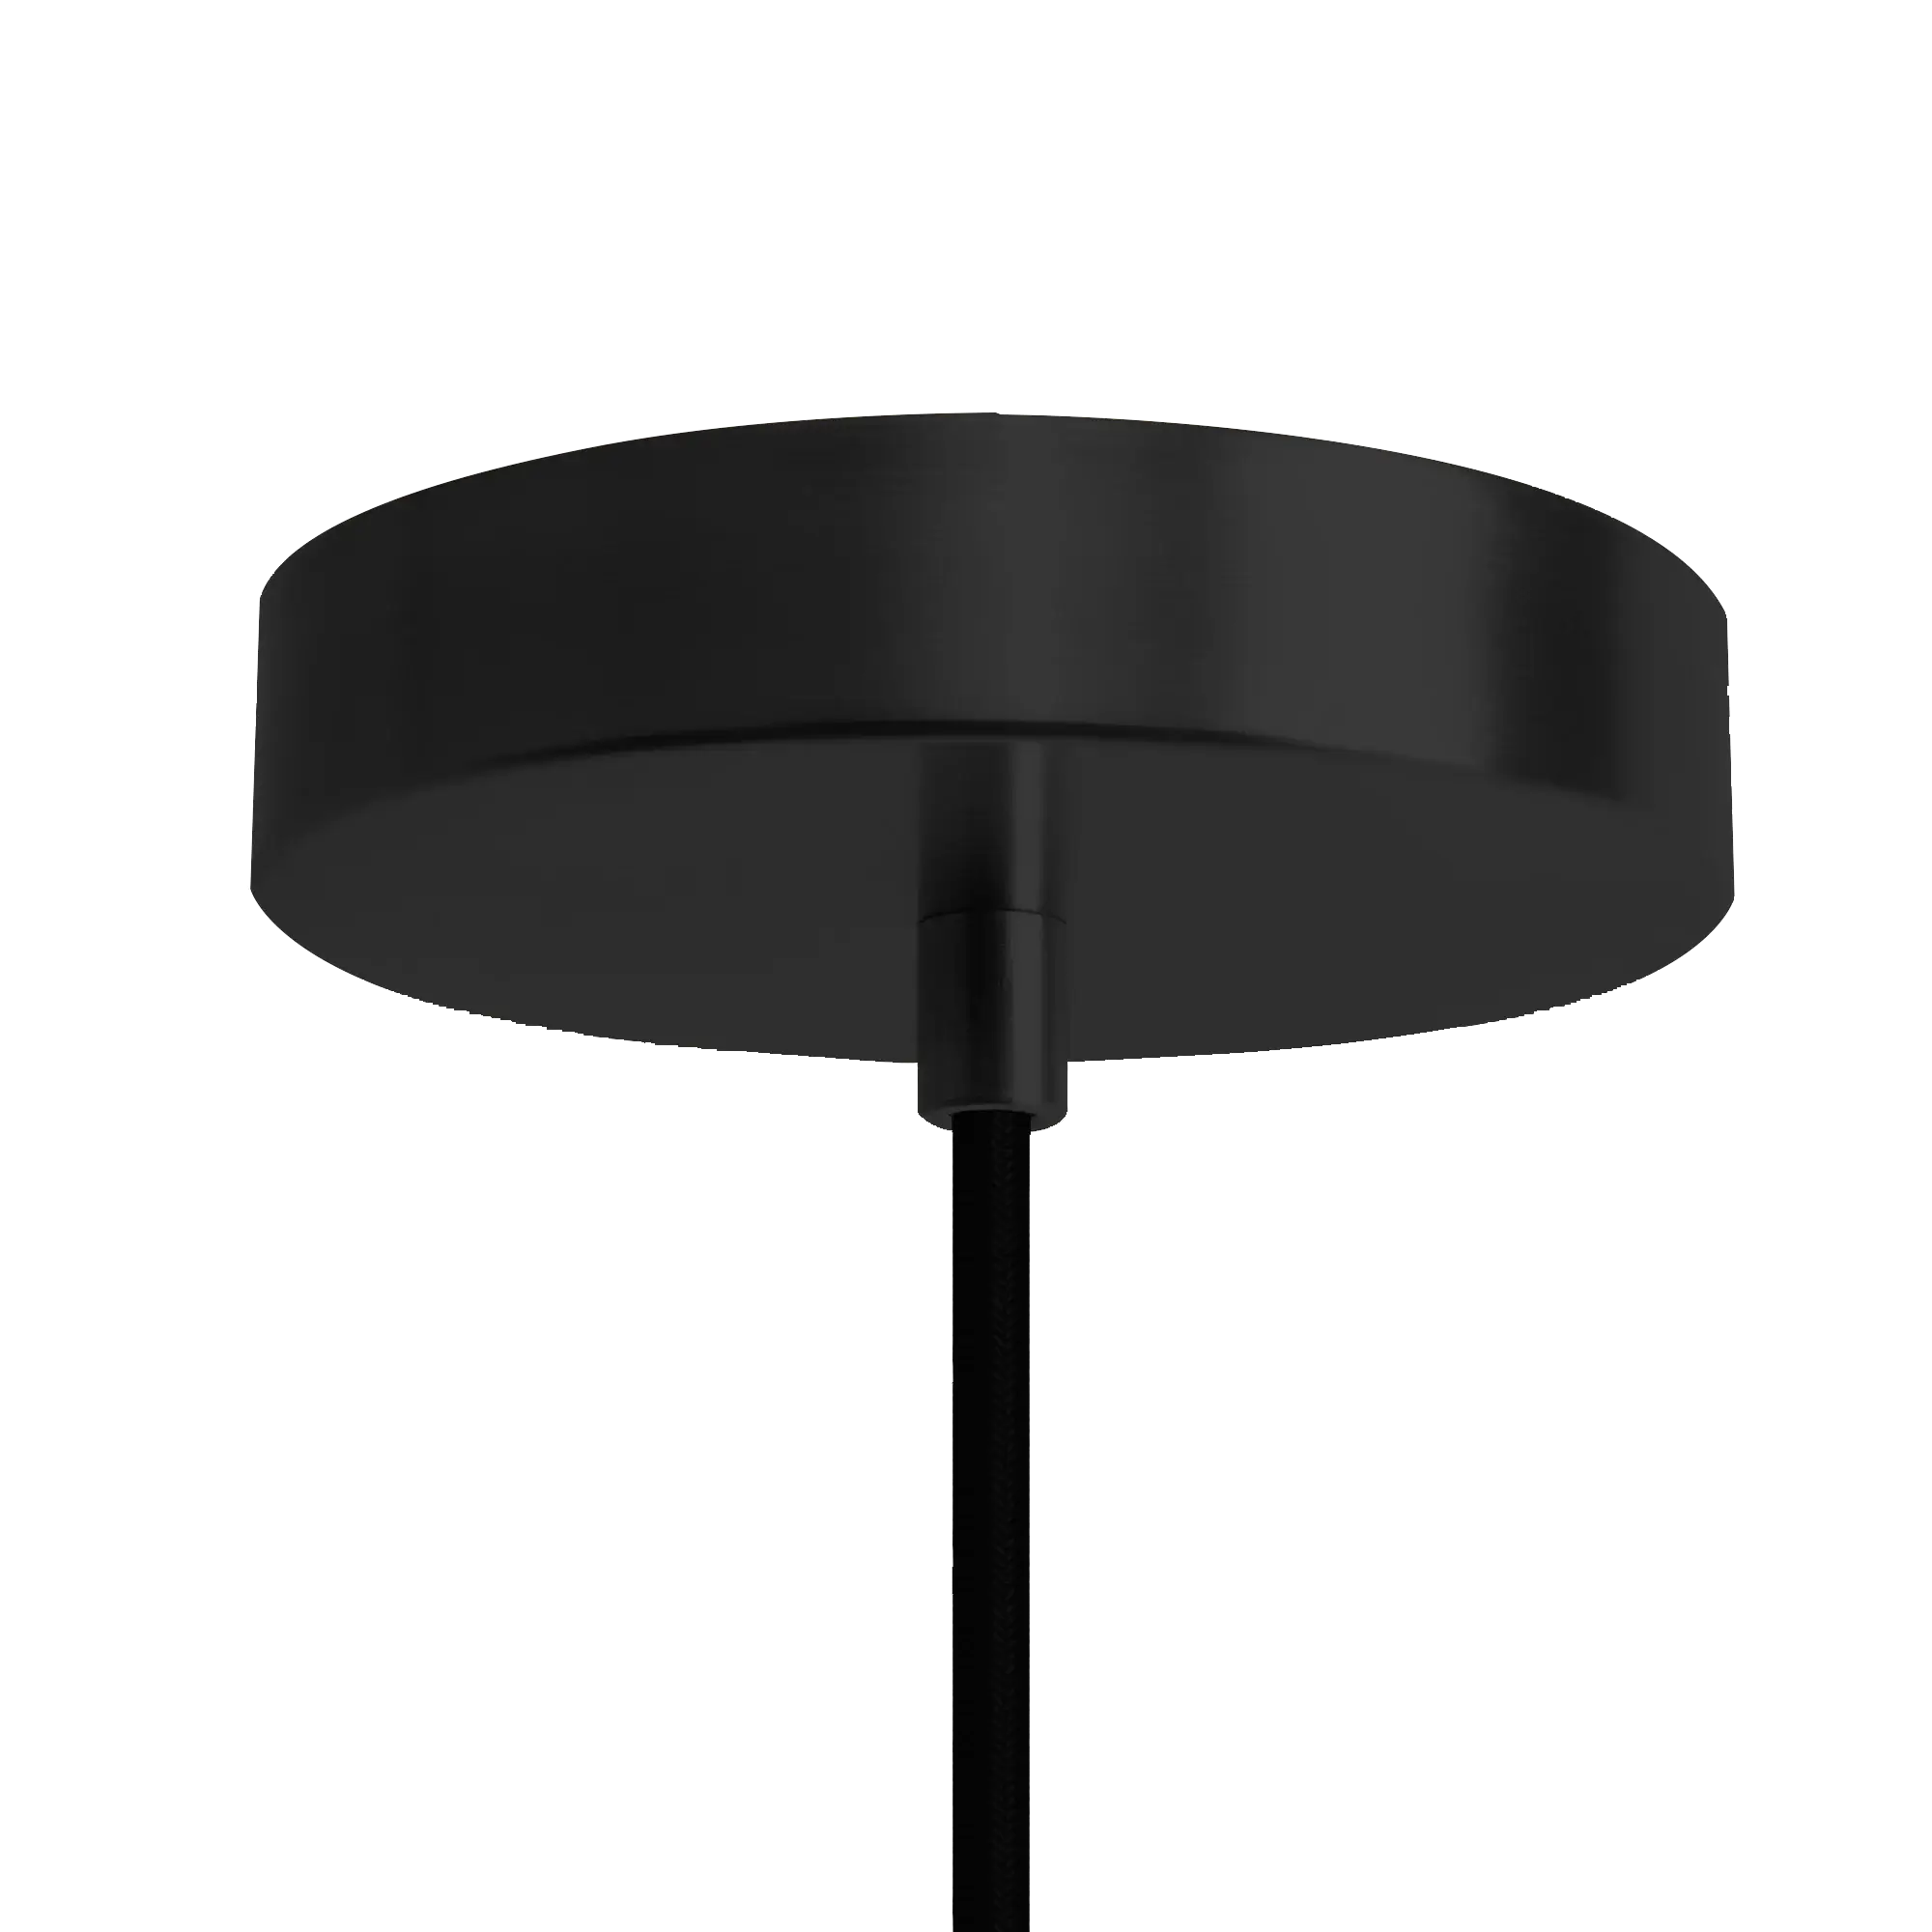 Dounia home Round canopy ceiling in black  made of Metal